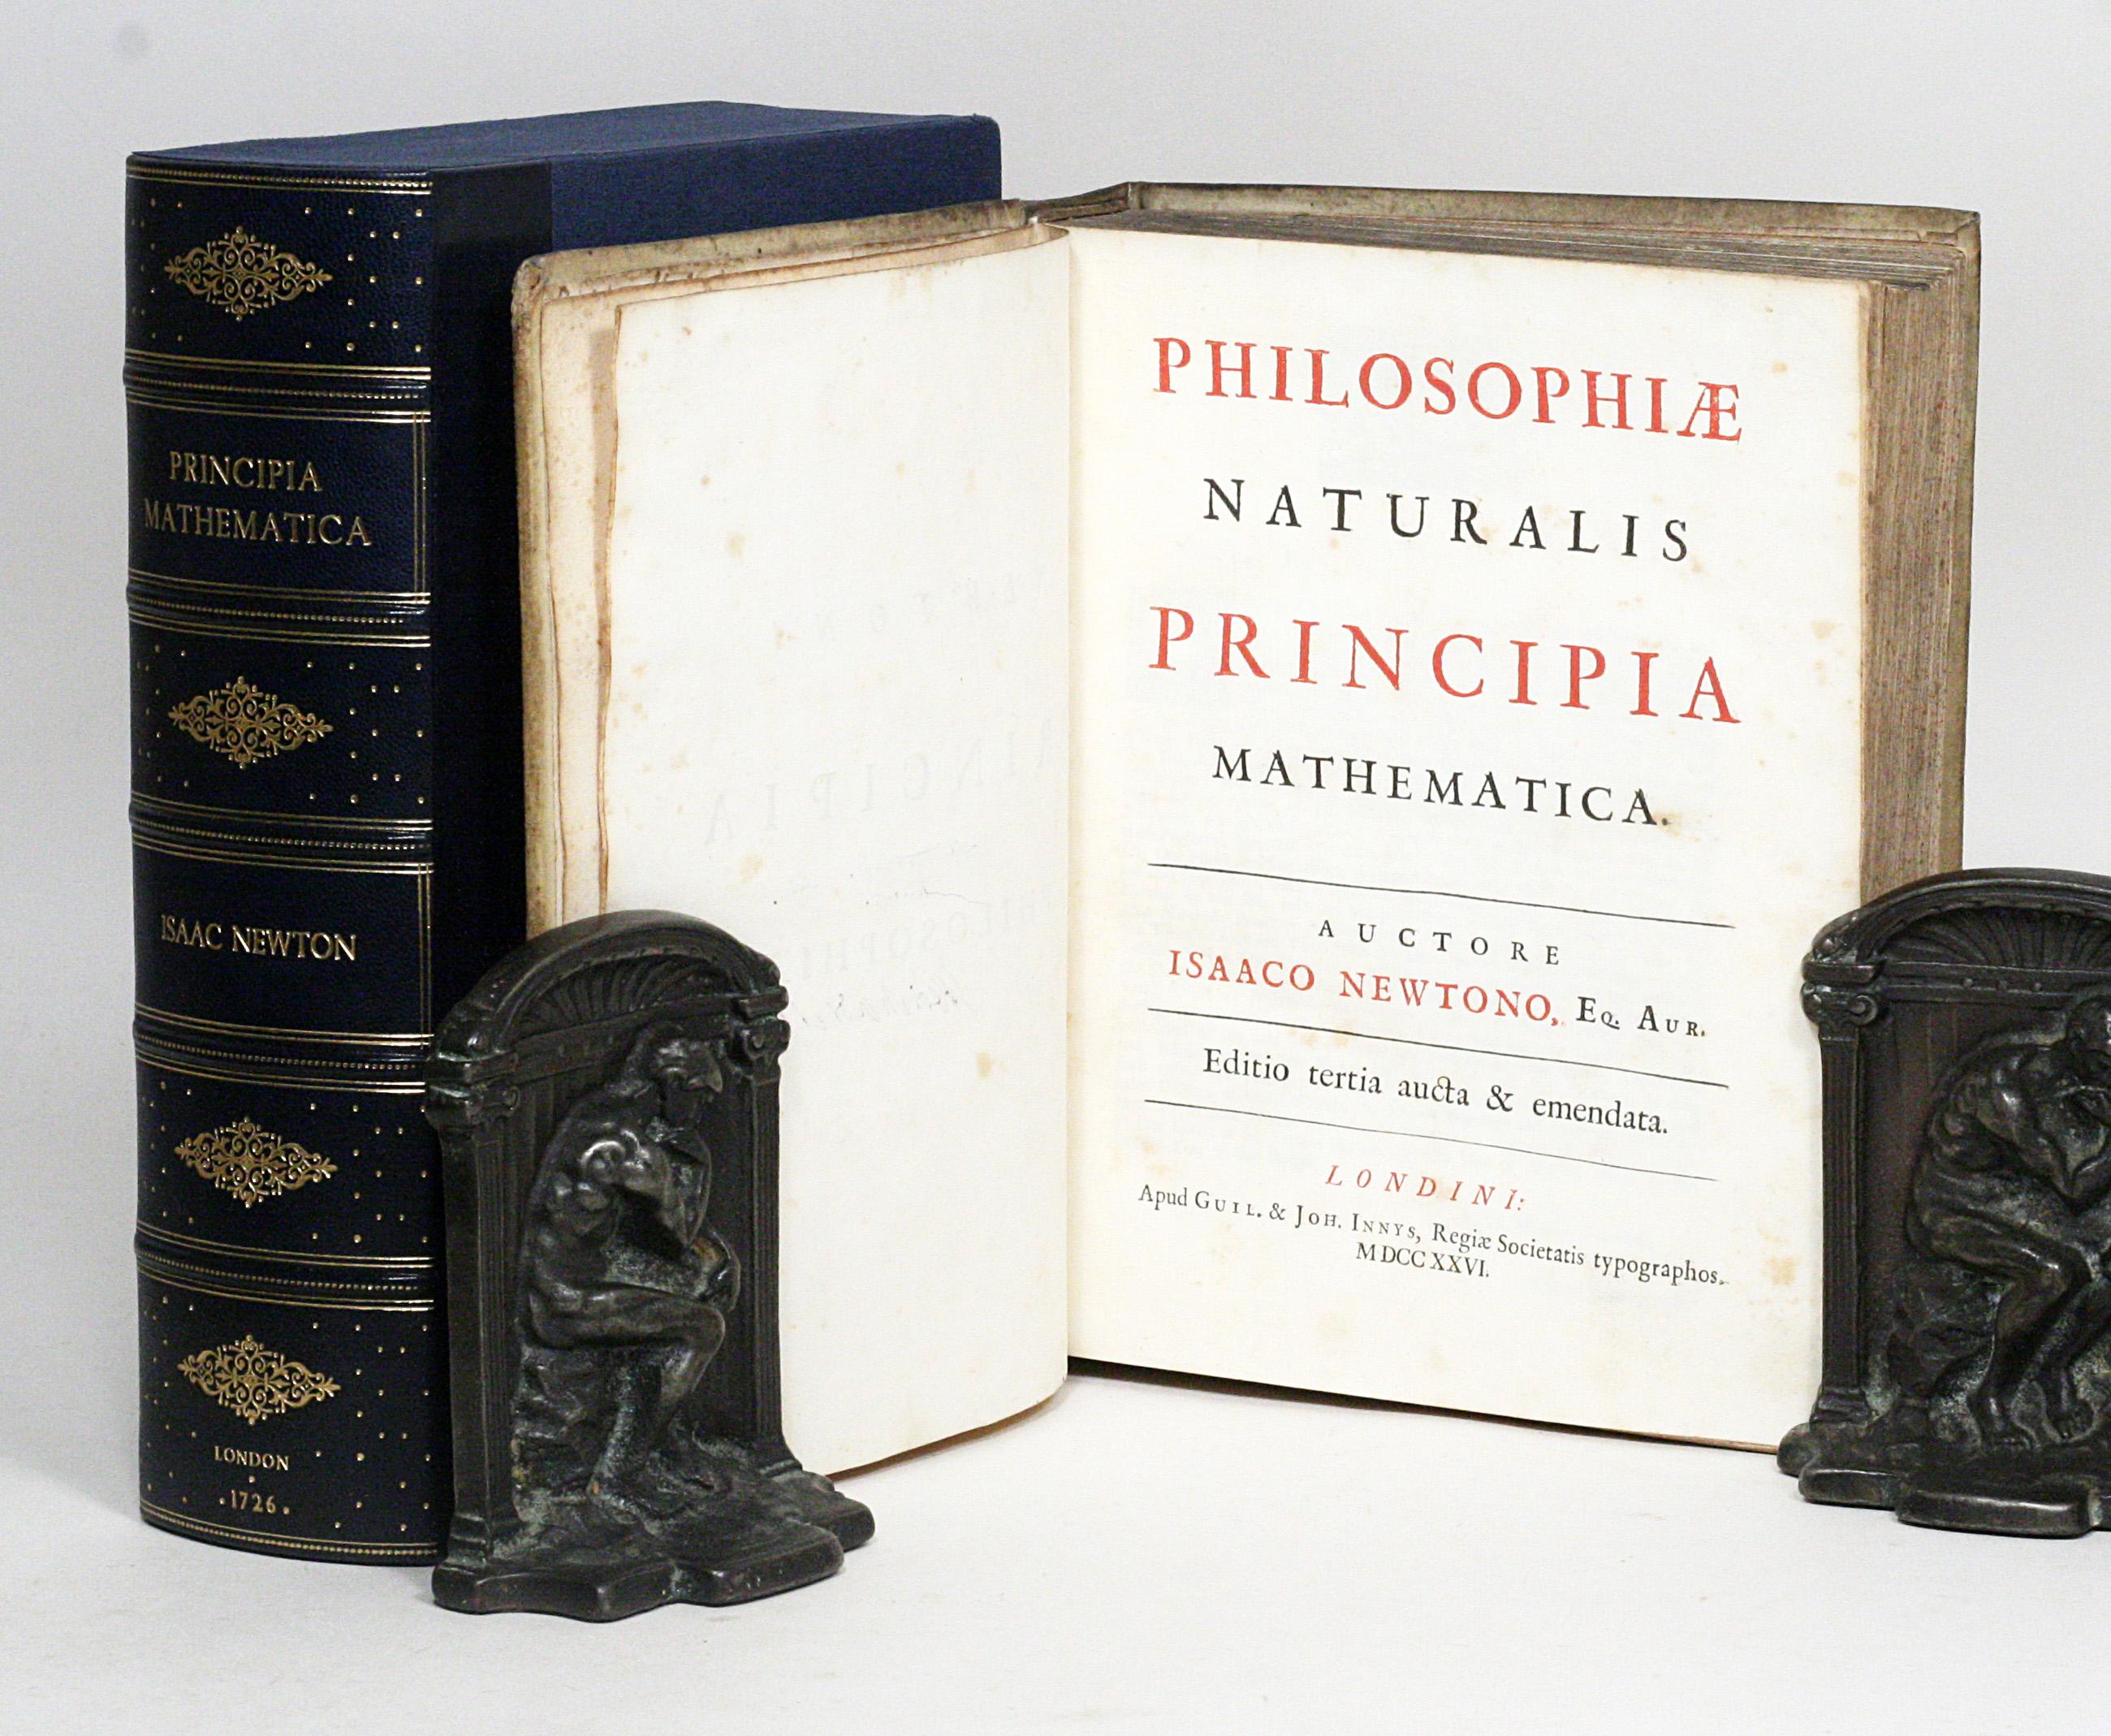 Newton, ISAAC.

Philosophiae Naturalis Principia Mathematica

Rare 1726 third edition of newton's principia, the last edition edited by newton and the basis for all subsequent editions. One of only 1250 copies printed.

